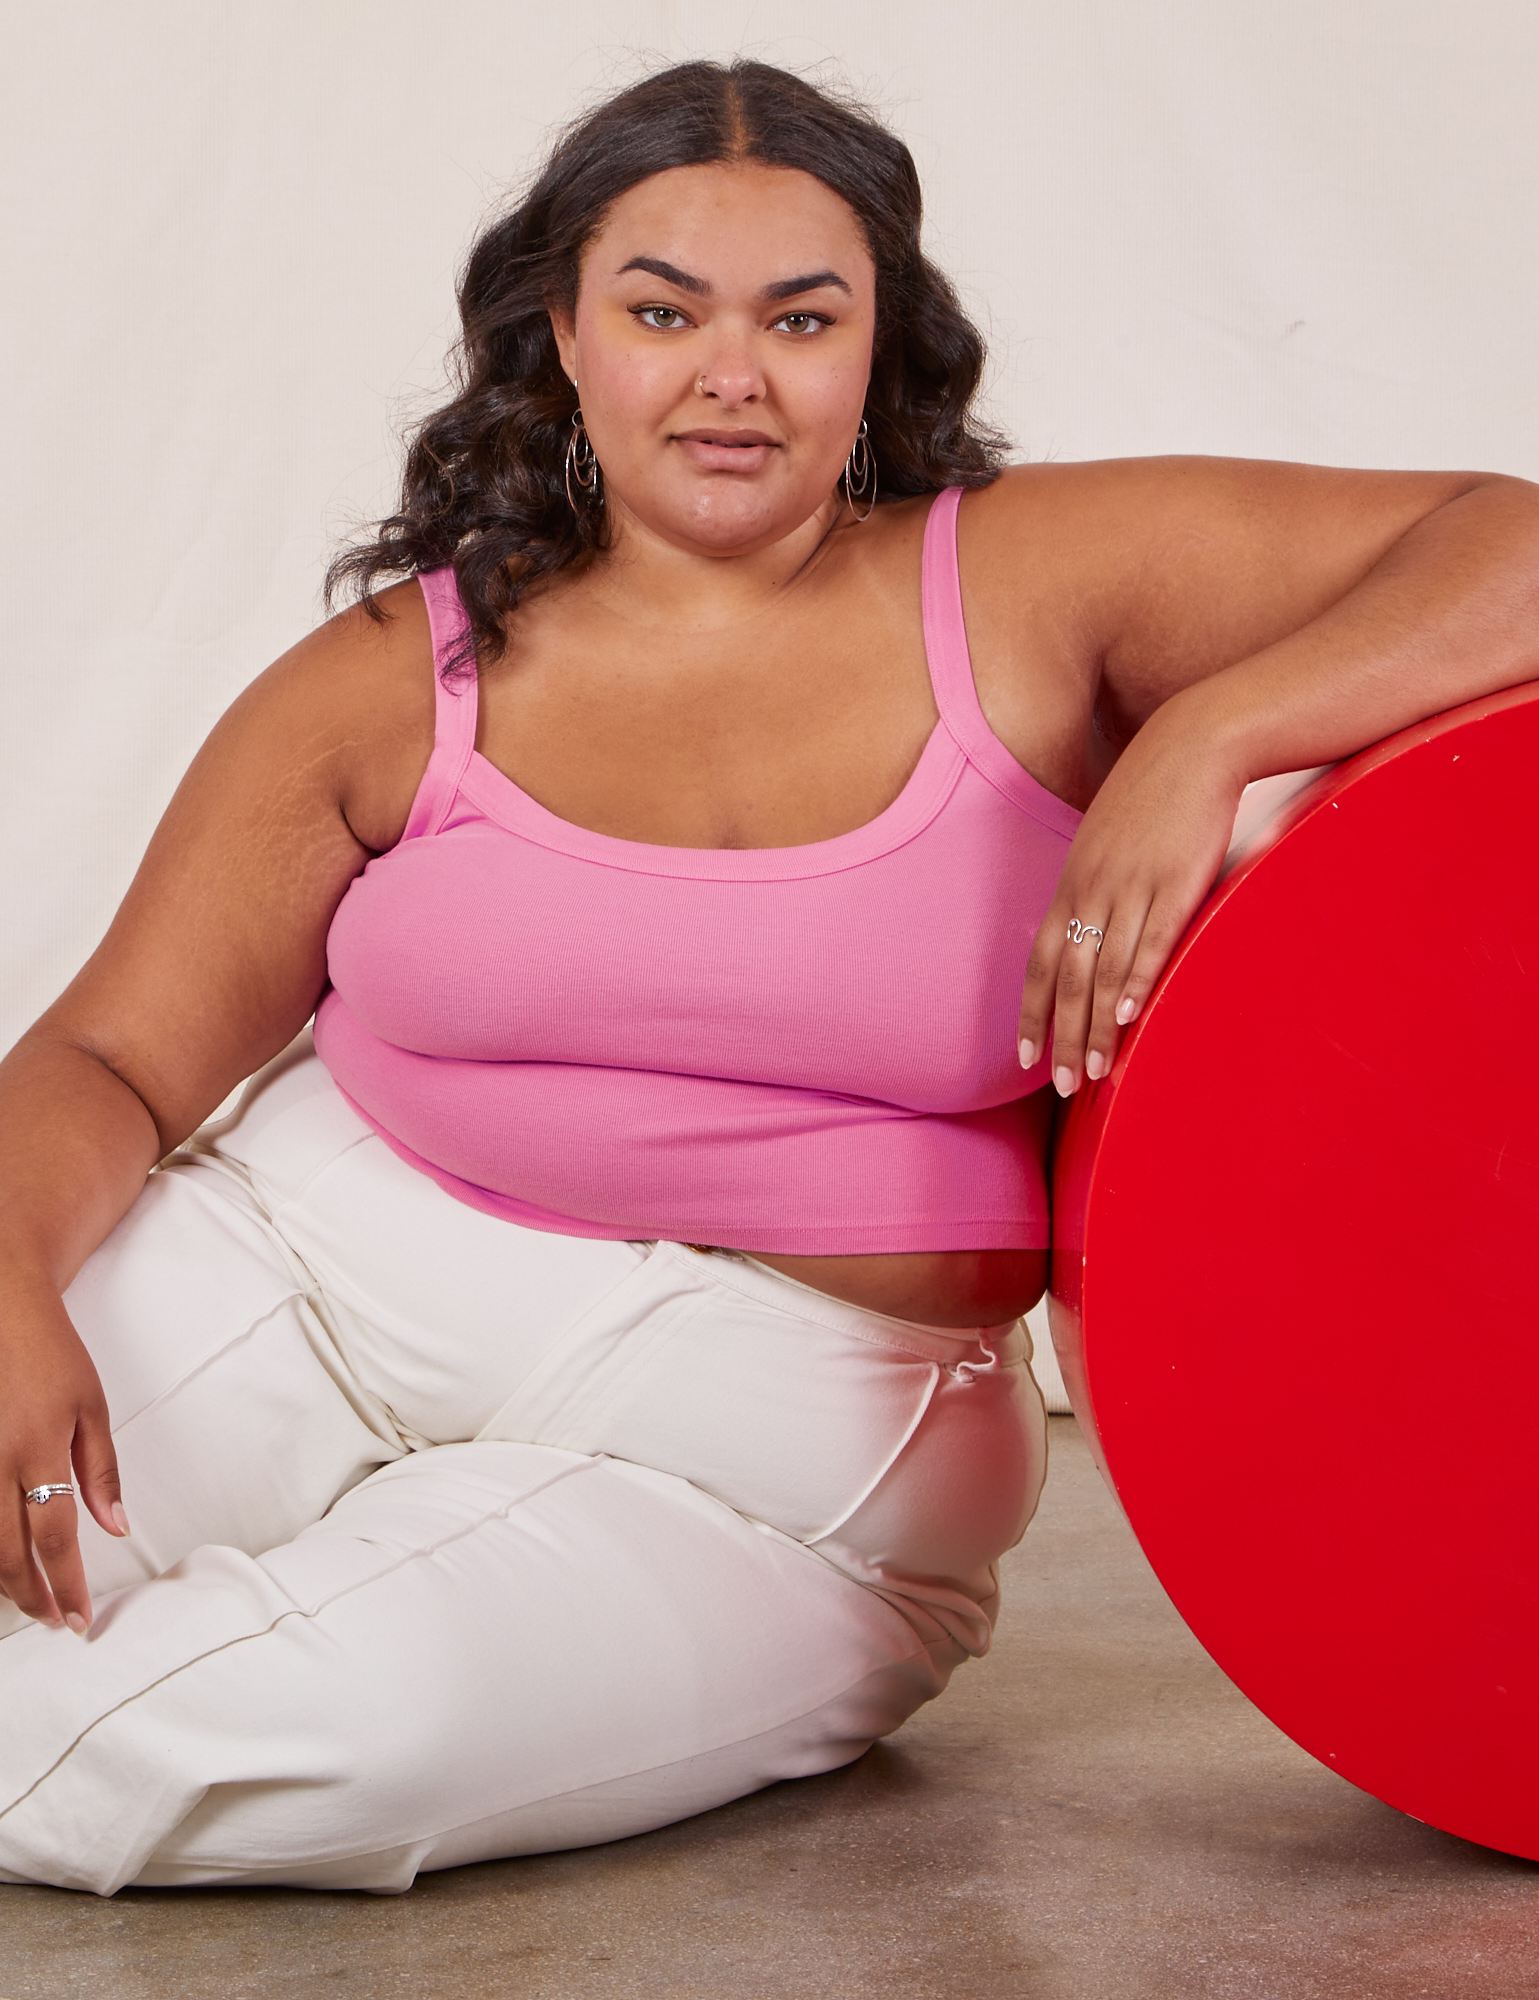 Alicia is sitting on the floor and has her right elbow on a red circular platform. She is wearing Cropped Cami in Bubblegum Pink and vintage tee off-white Western Pants.